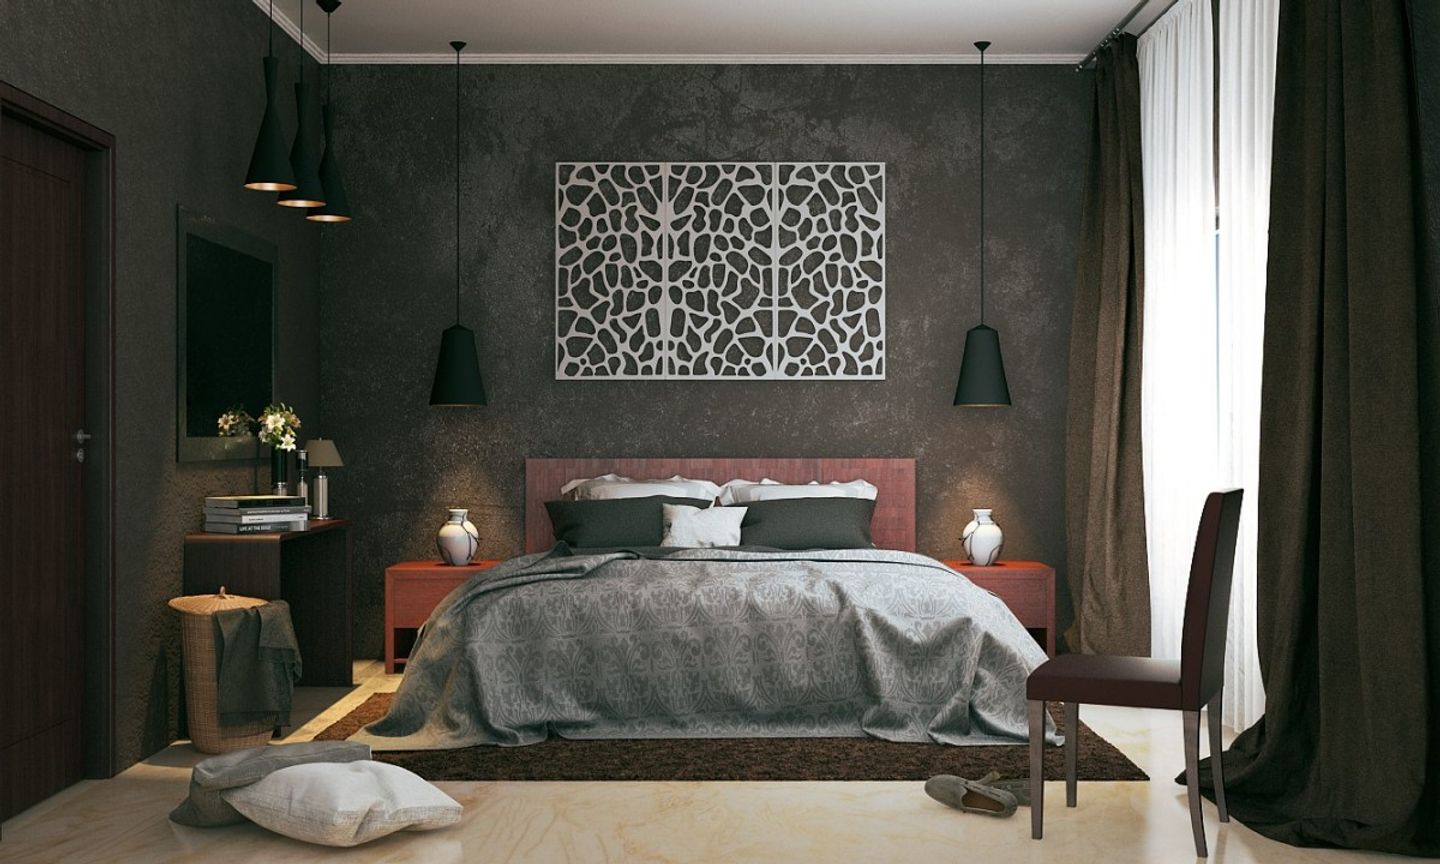 Modern Grey And Black Master Bedroom Design With Wall Paint